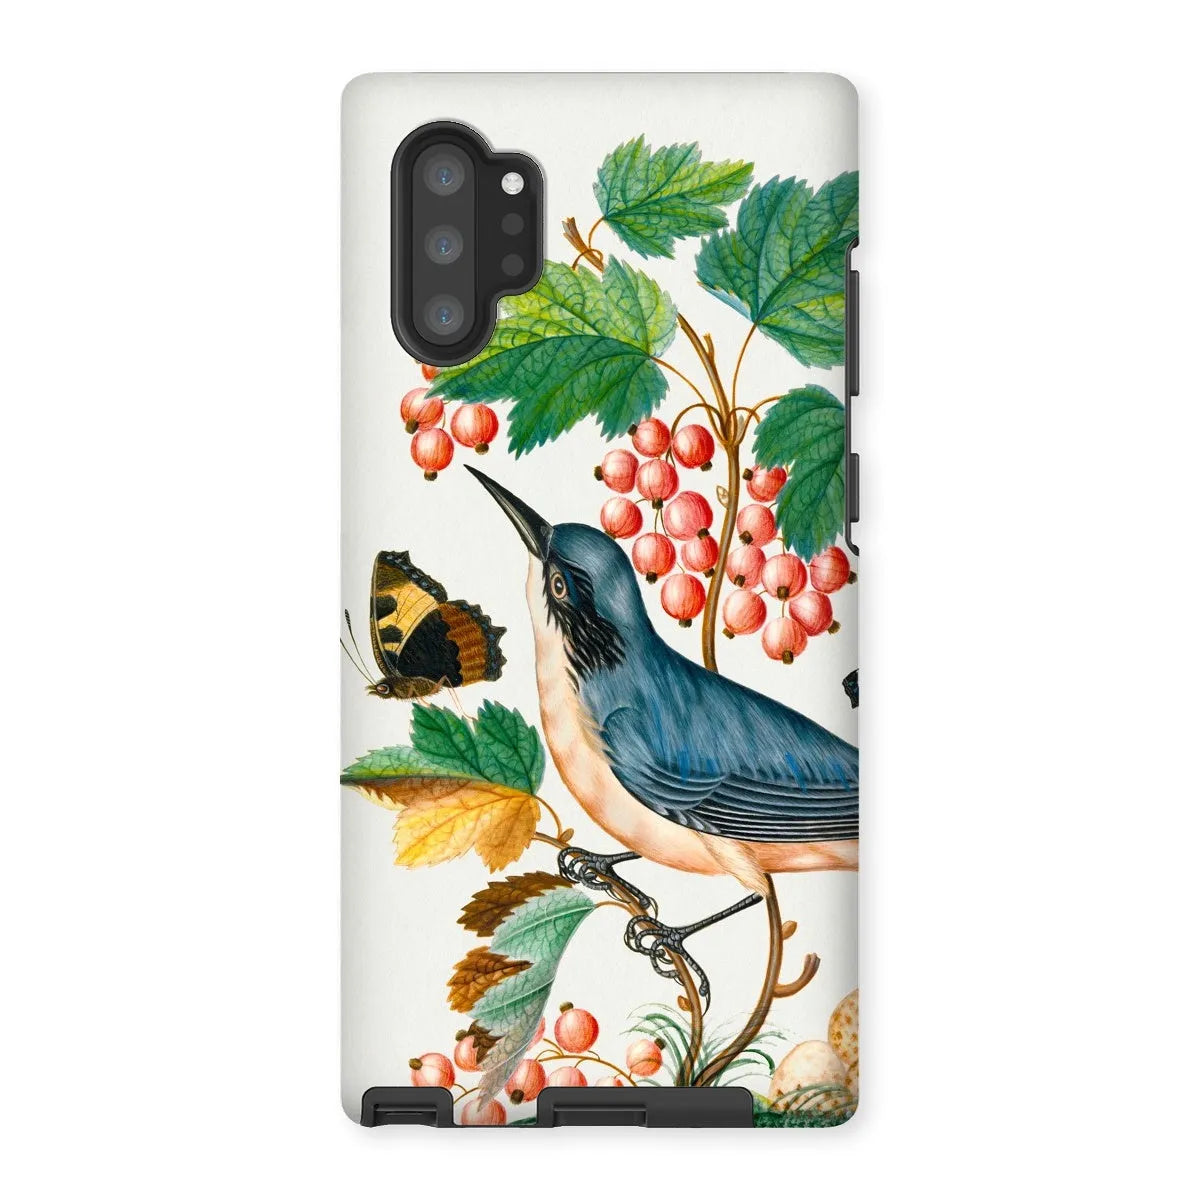 Warbler Admiral Wasps & Ants - Art Phone Case - James Bolton - Samsung Galaxy Note 10p / Matte - Mobile Phone Cases